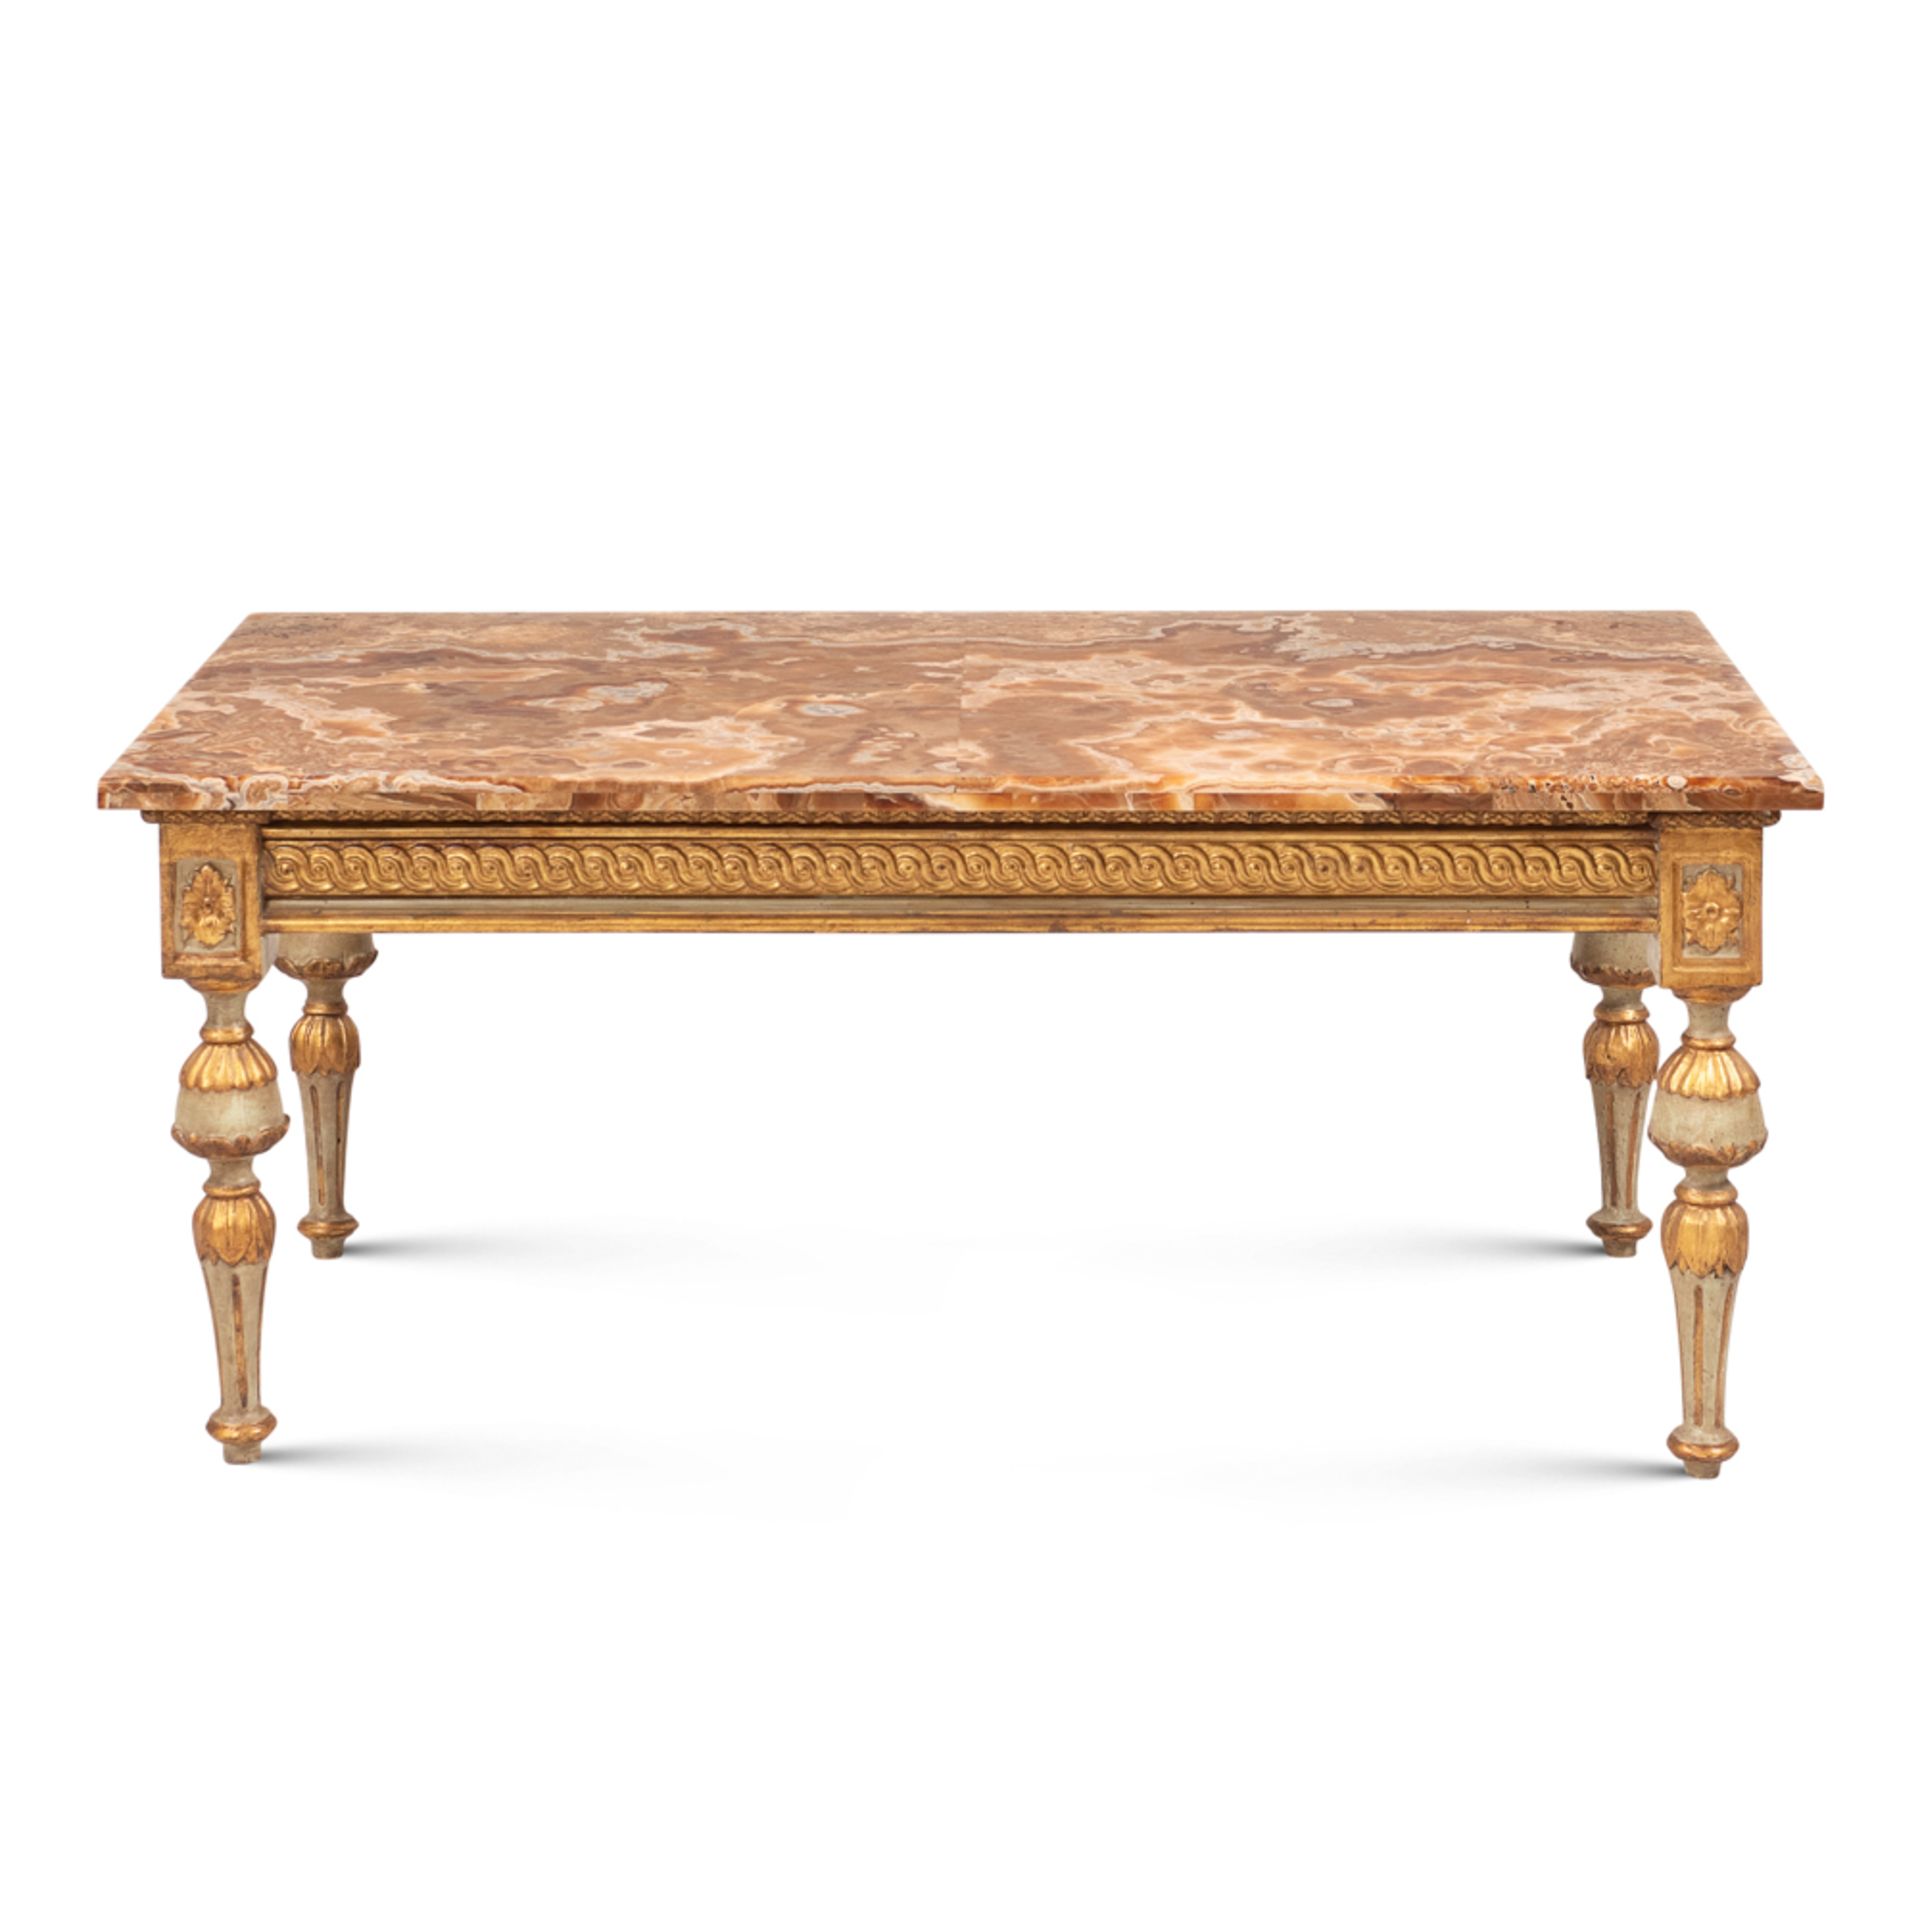 Lacquered and gilt wood coffee table Italy, 18th-19th century 47x105x58 cm